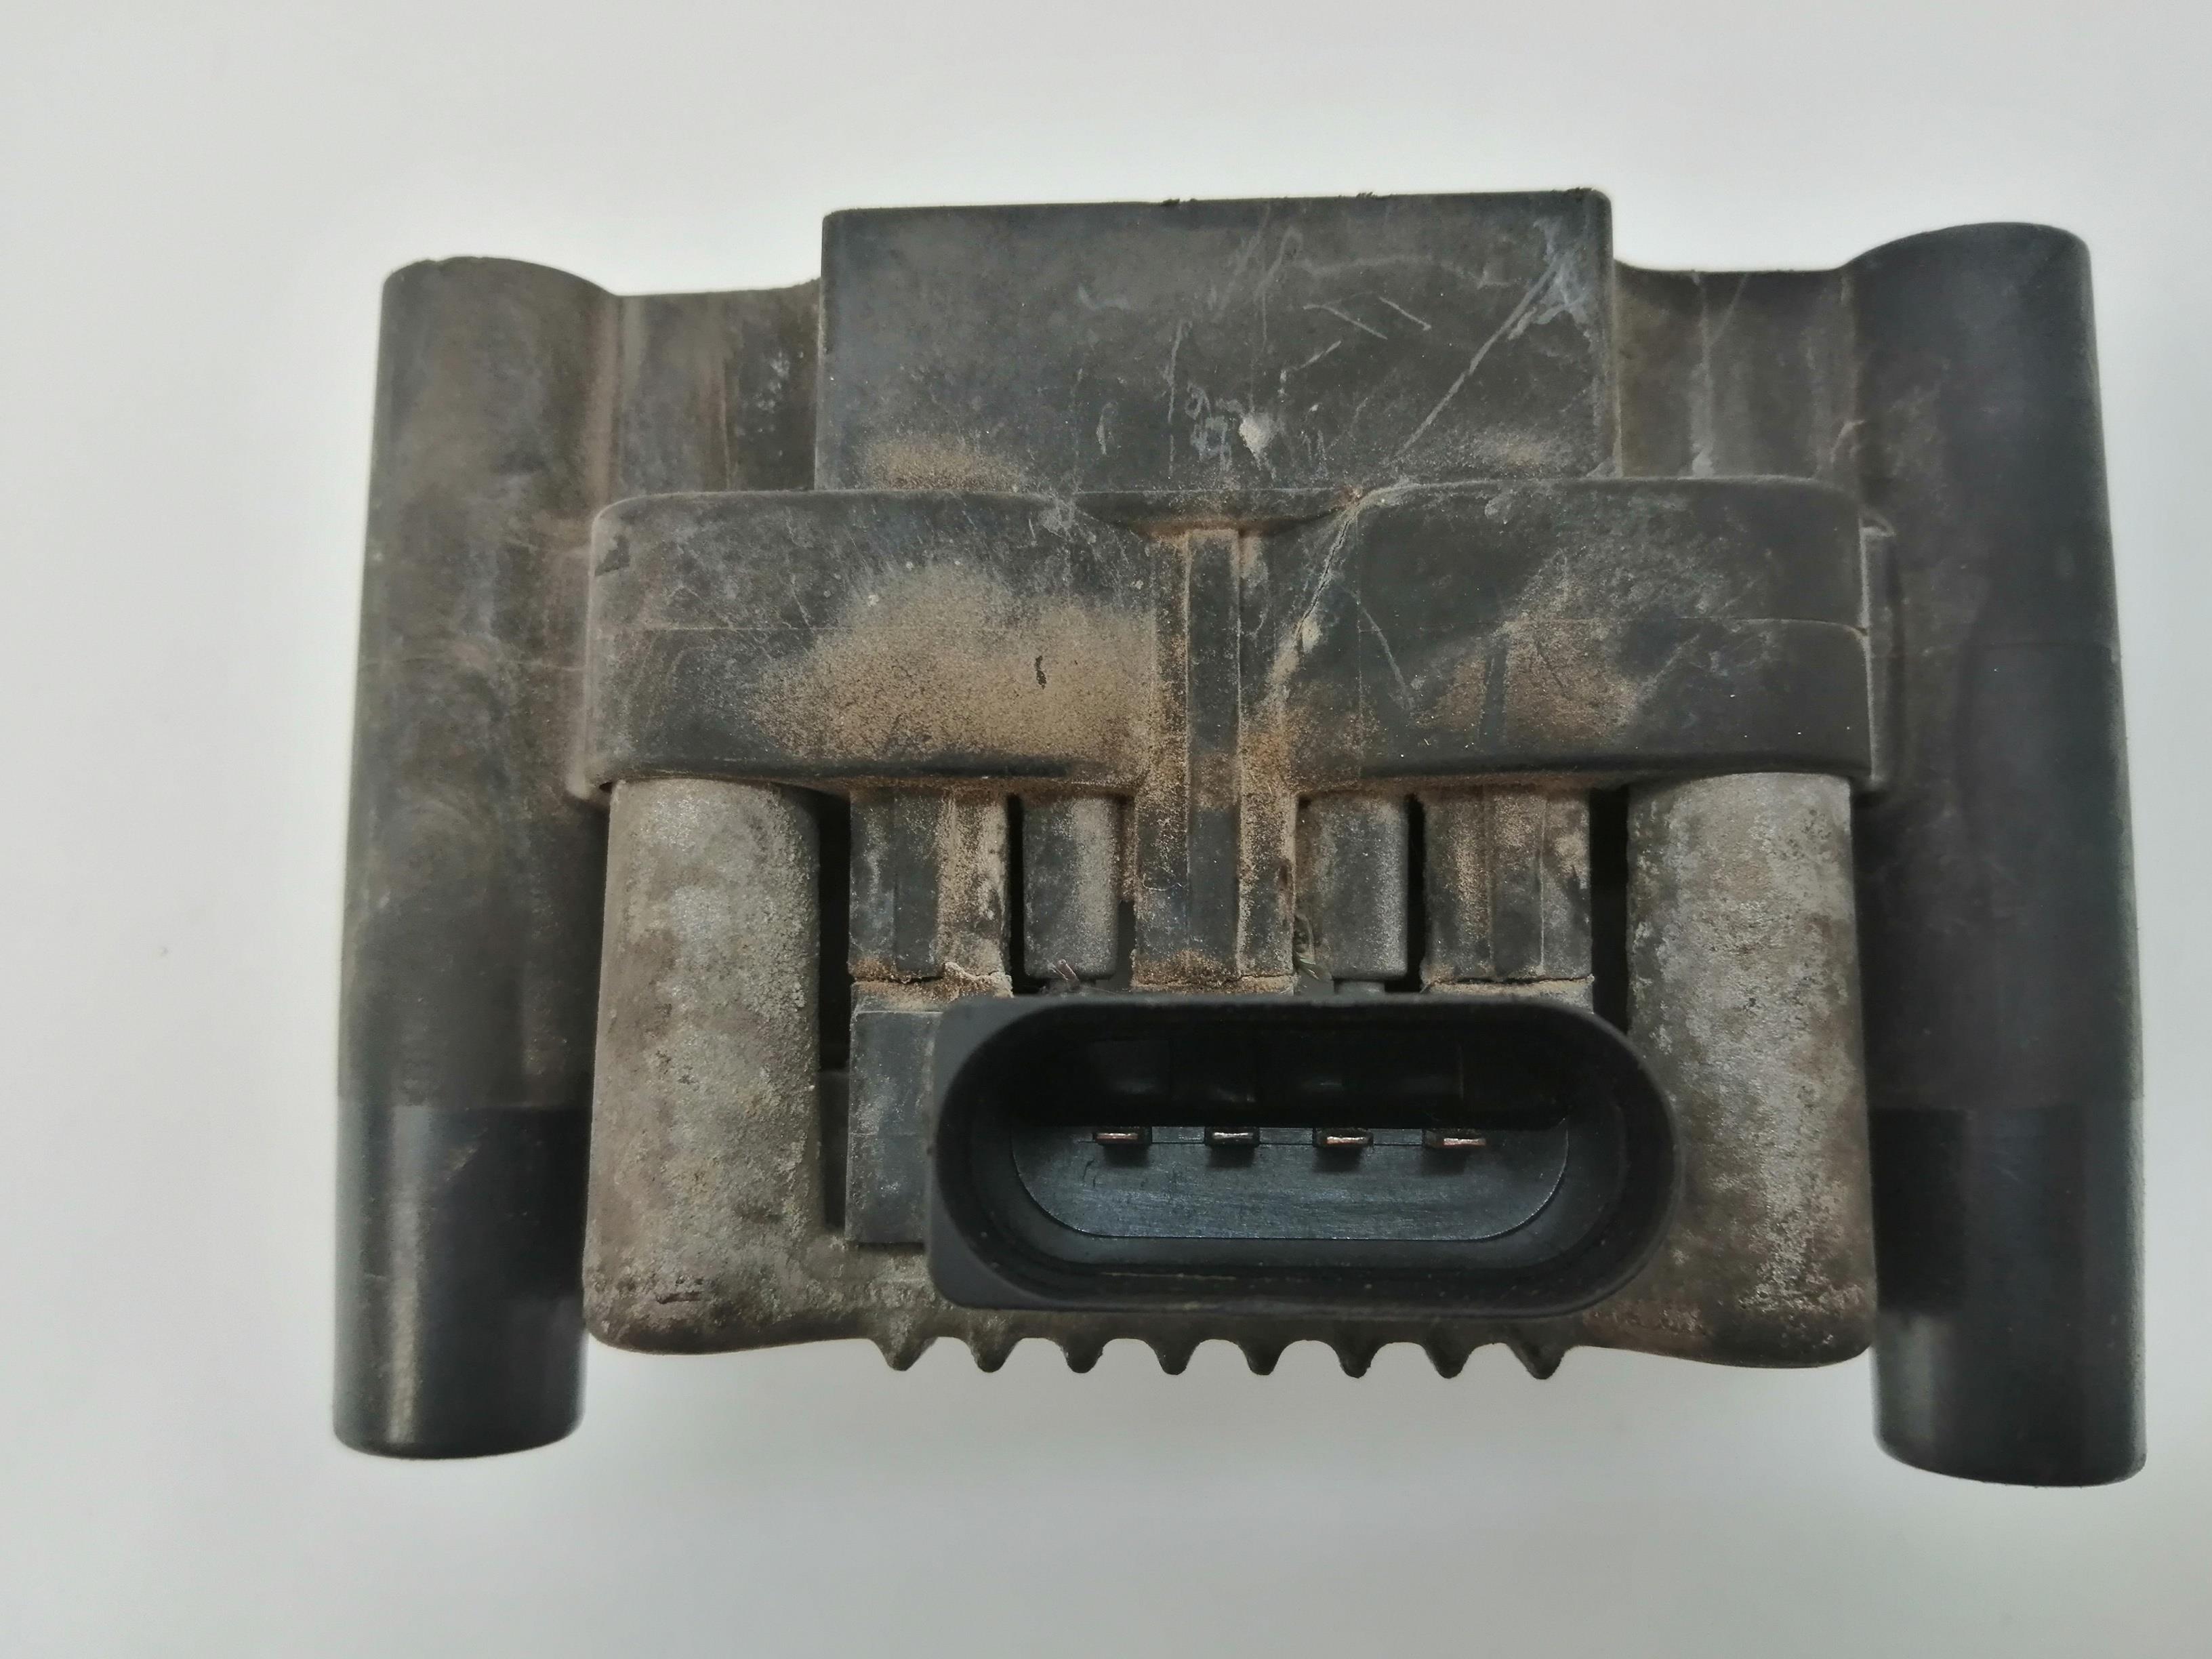 SEAT Toledo 2 generation (1999-2006) High Voltage Ignition Coil 032905106B 24029948